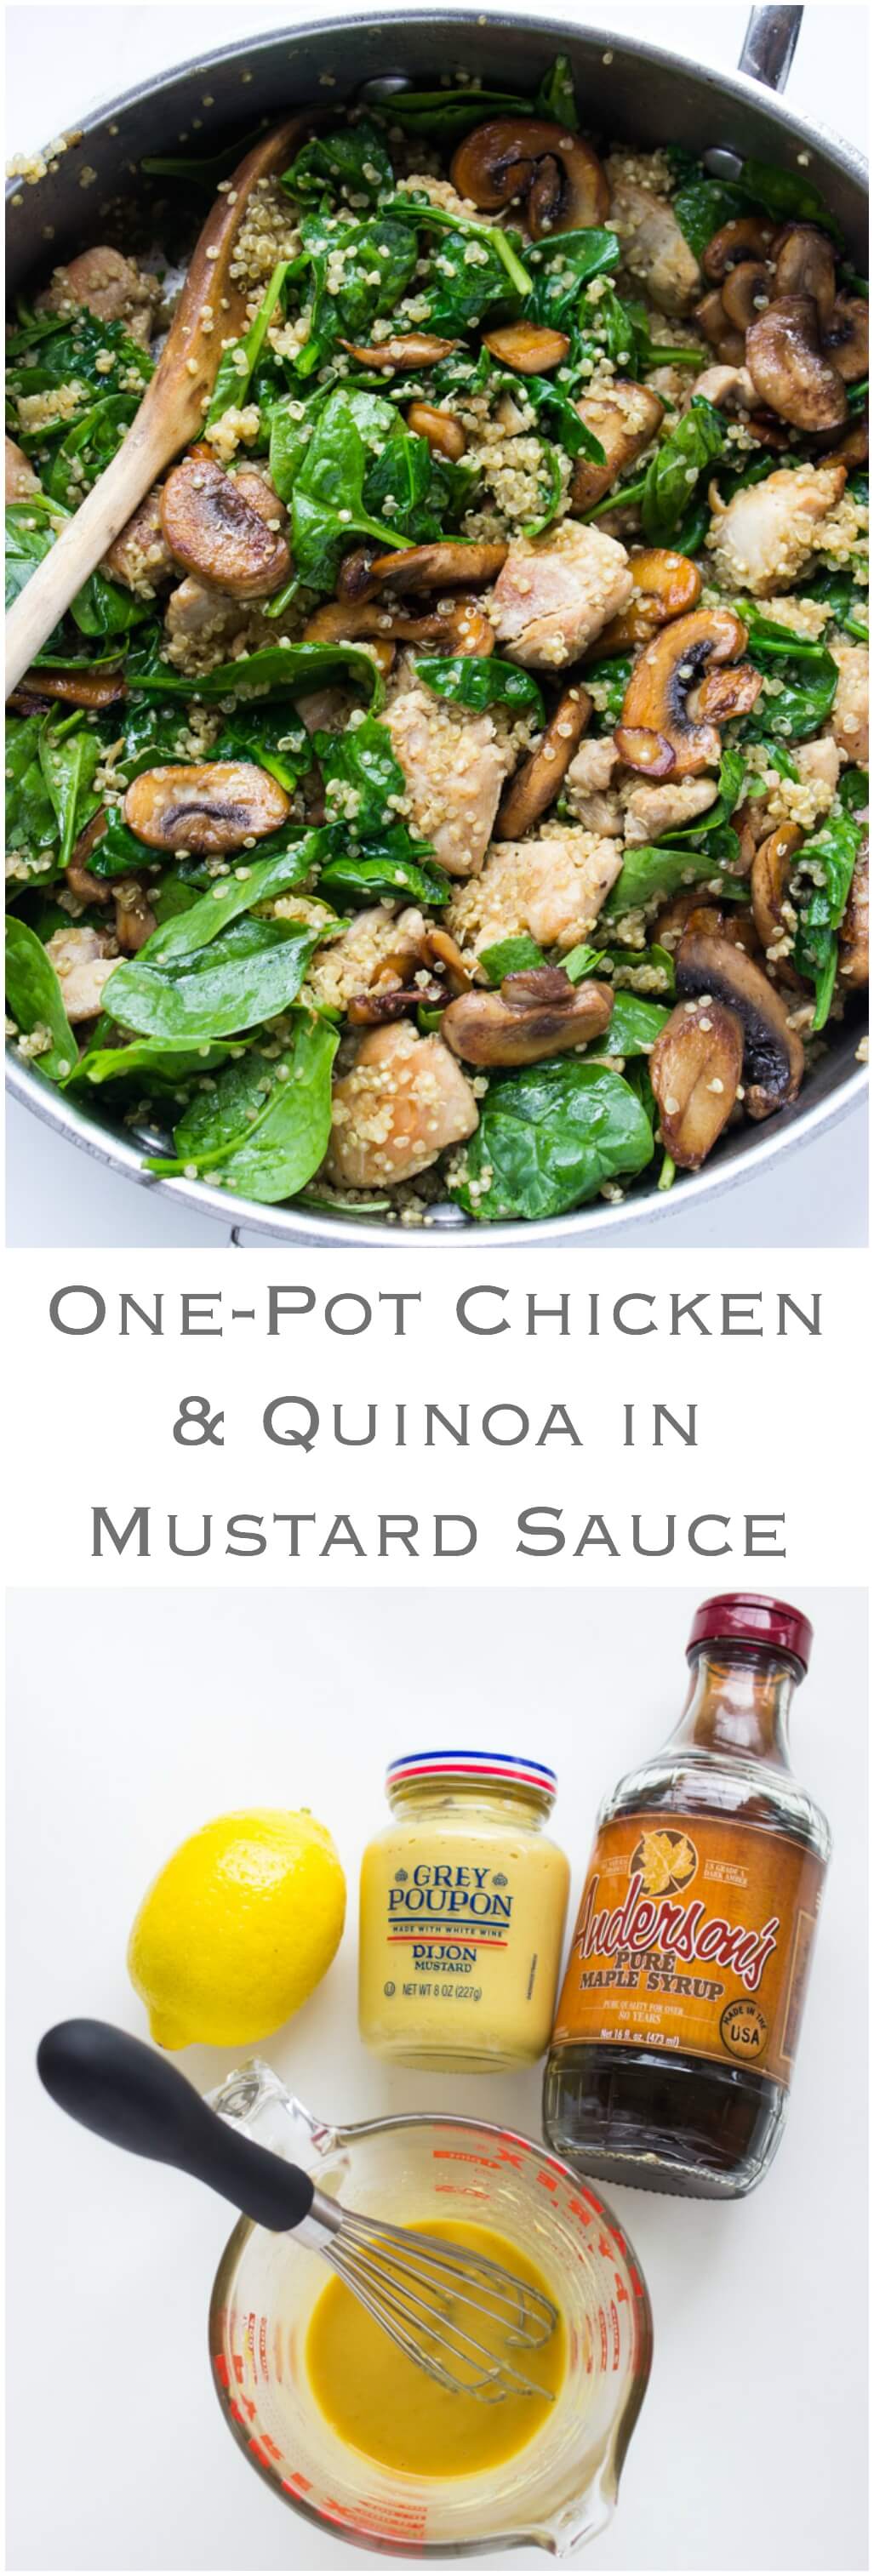 Healthy one-pot chicken and quinoa dinner, with baby spinach and mushrooms in a tangy sweet mustard sauce | littlebroken.com @littlebroken